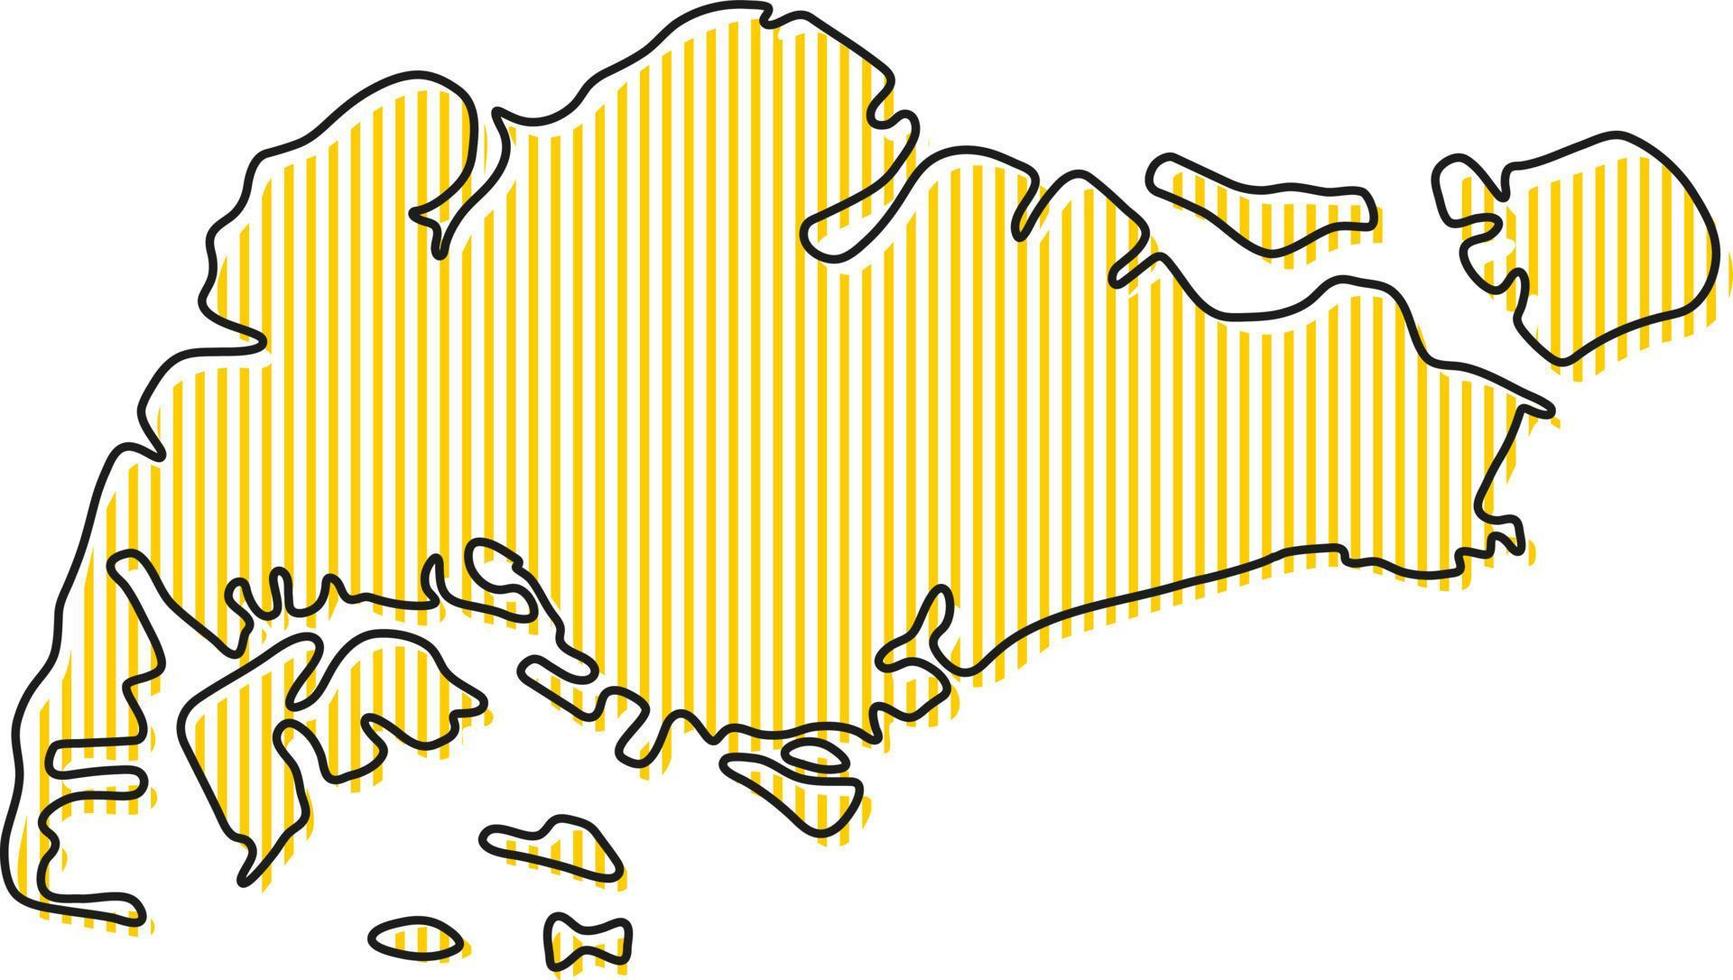 Stylized simple outline map of Singapore icon. vector